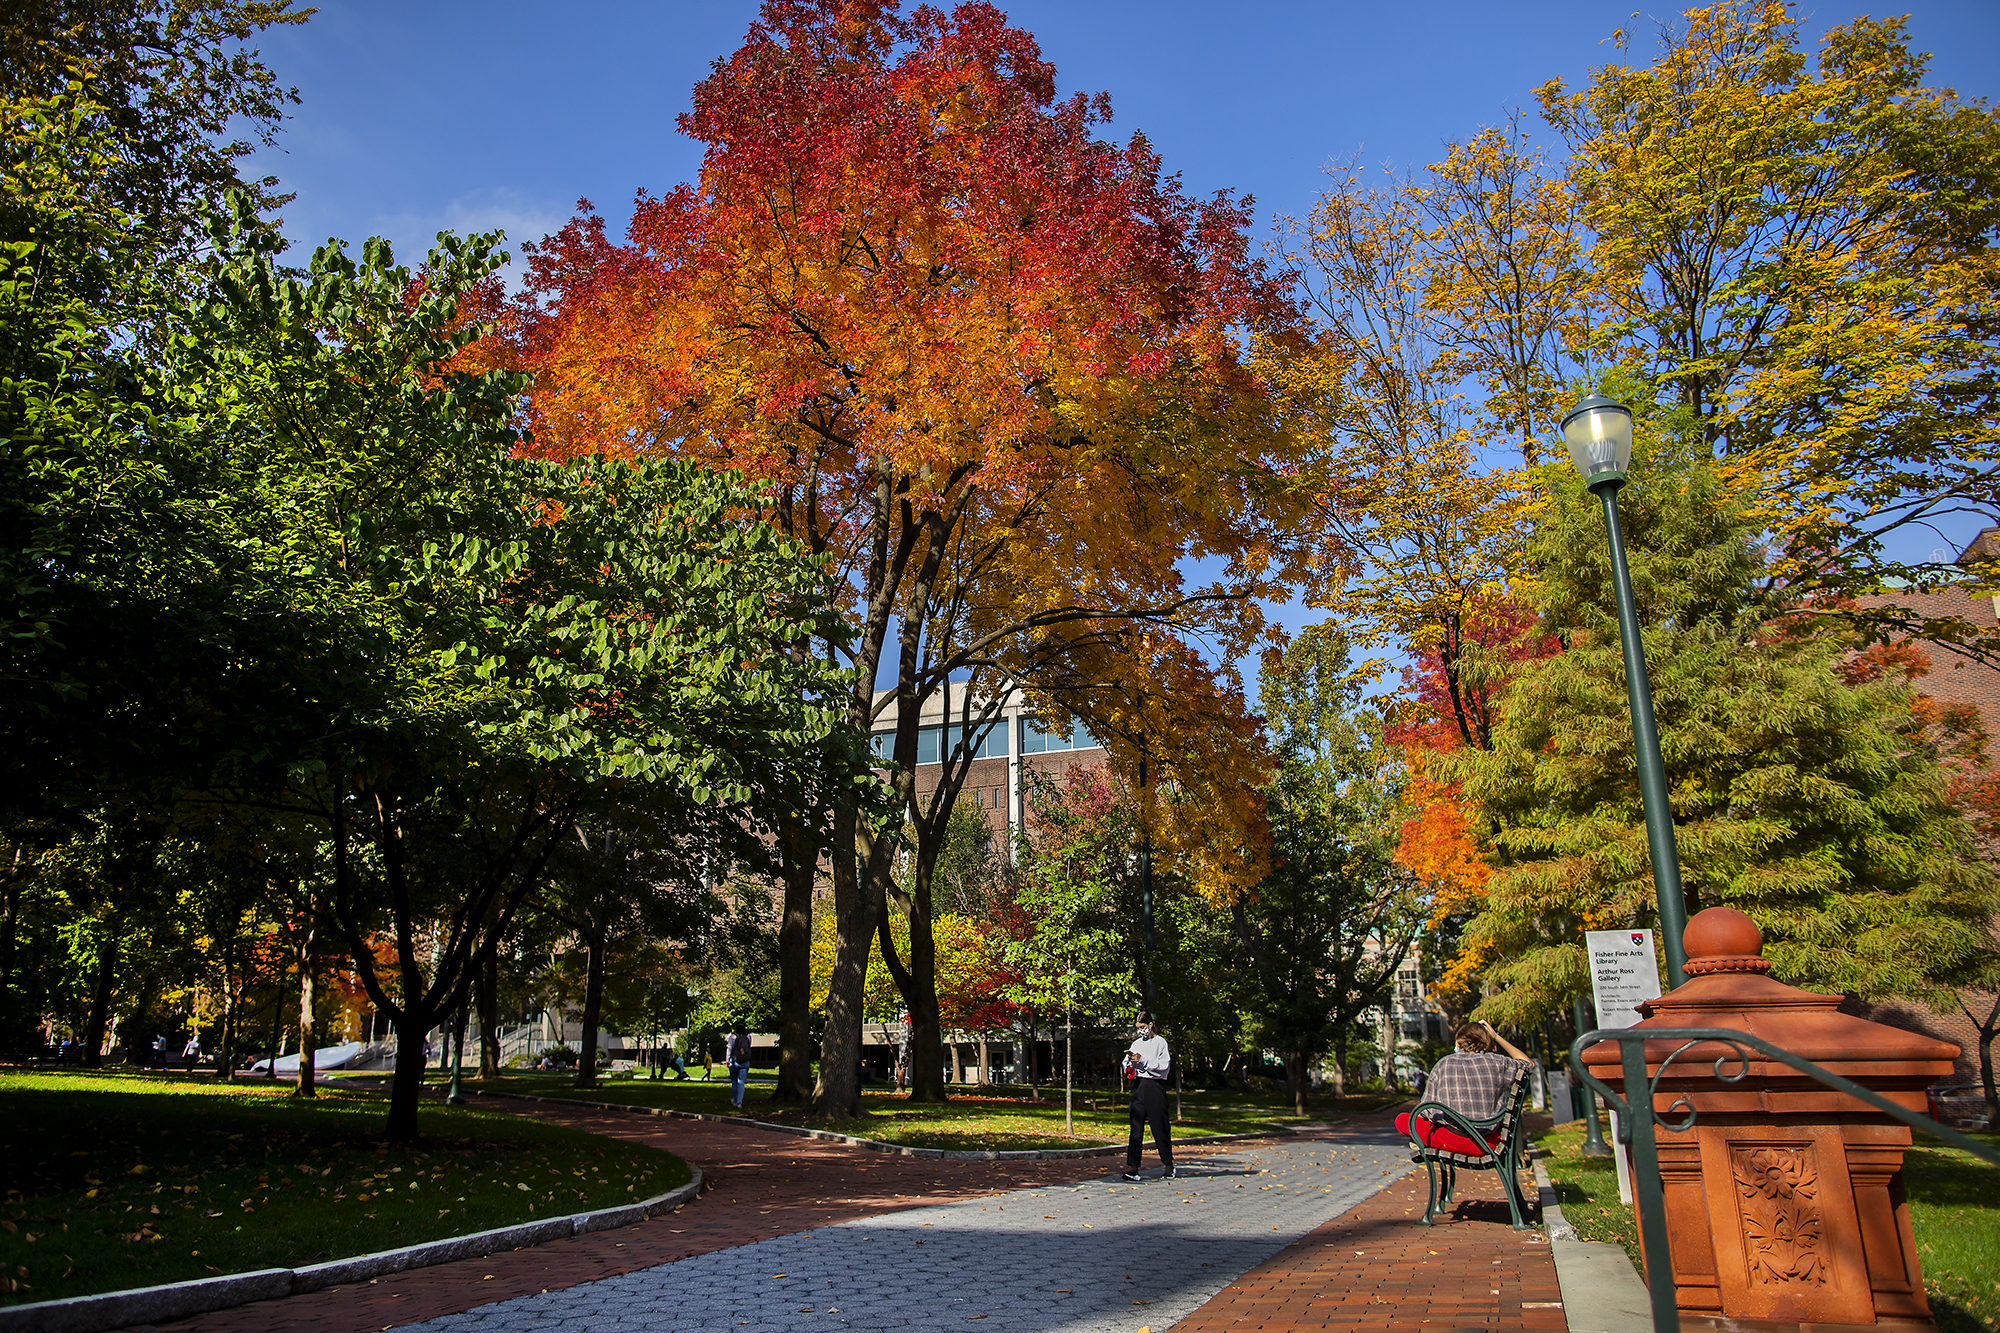 Two people on Locust Walk, one walking, one on a bench, with view of Walnut Street beyond colorful fall trees. 